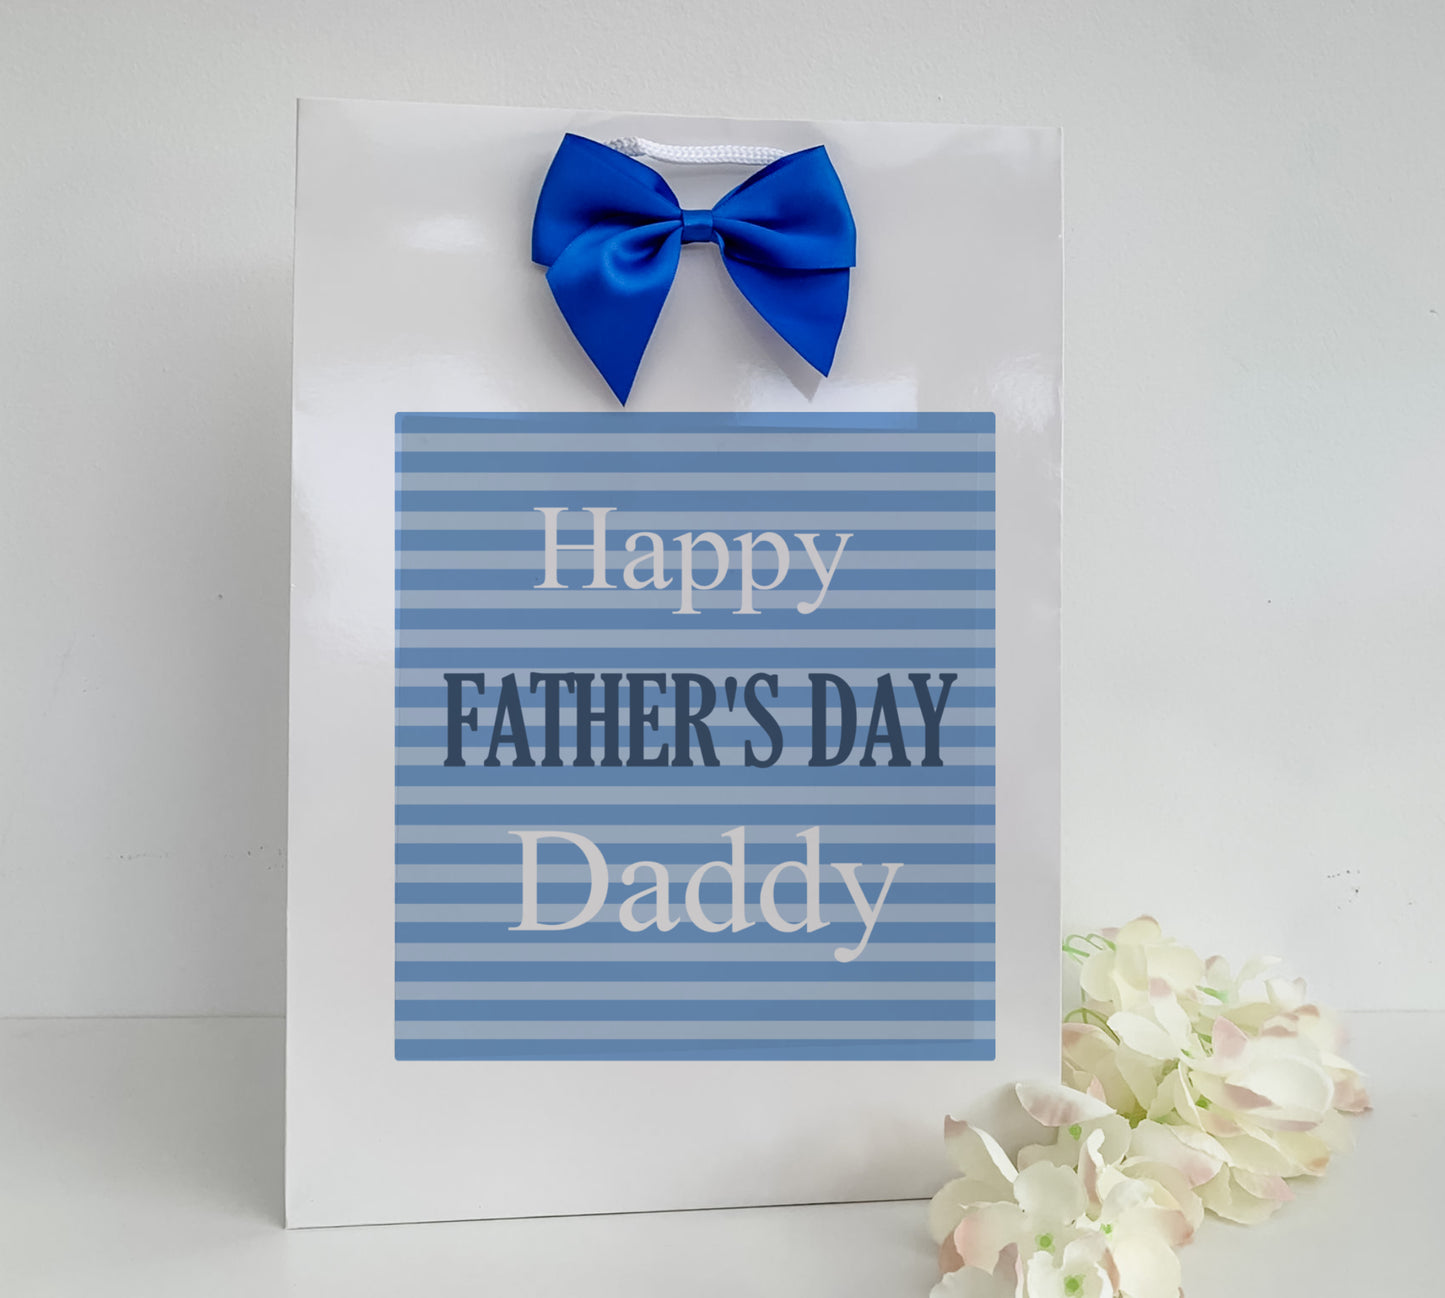 a father's day card with a blue bow